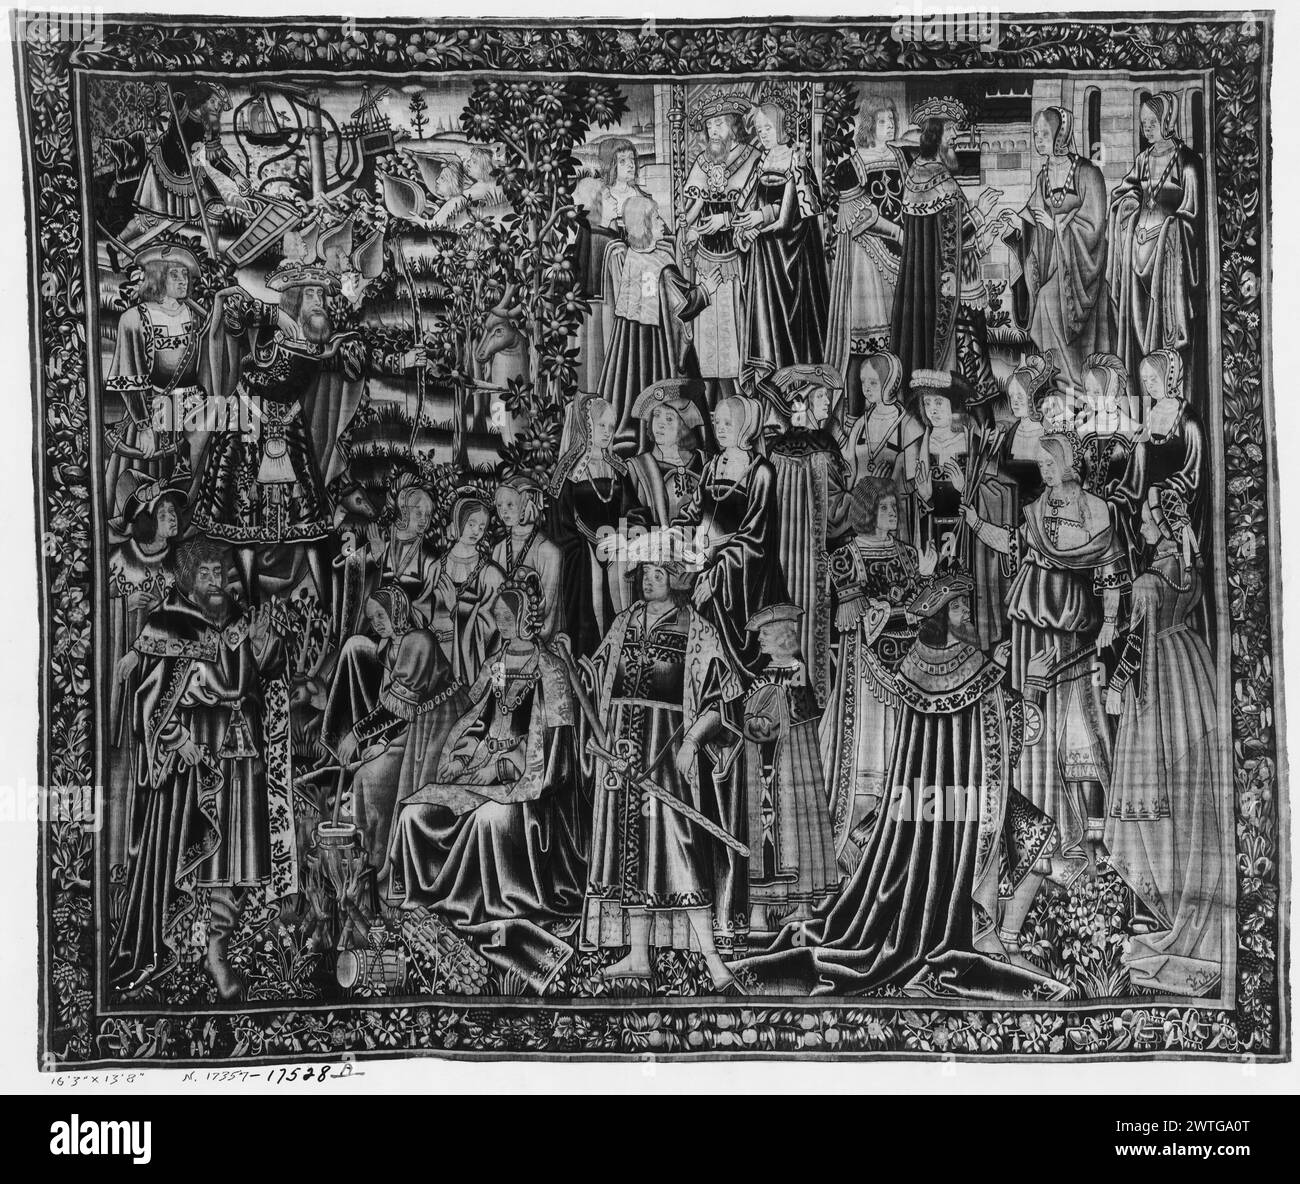 Arrival of Aeneas at Dido's court and other scenes. unknown c. 1500-1525 Tapestry Dimensions: H 13'8' x W 16'3' Tapestry Materials/Techniques: unknown Culture: Southern Netherlands Weaving Center: unknown Ownership History: French & Co. purchased from Morgan Coll. of Tapestries (from Knole Coll.) 8/15/1916; sold to W. H. Smith 1/1/1920 [SS 7031]. French & Co. received from W. Hickle Smith, invoiced 2/20/1932; 'A' returned 11/9/1939 [SS 17528]. Inscriptions: Inscription in central field, identifying figure [on hem of skirt; partially legible in photograph]: VENVS Group of courtiers, young beard Stock Photo